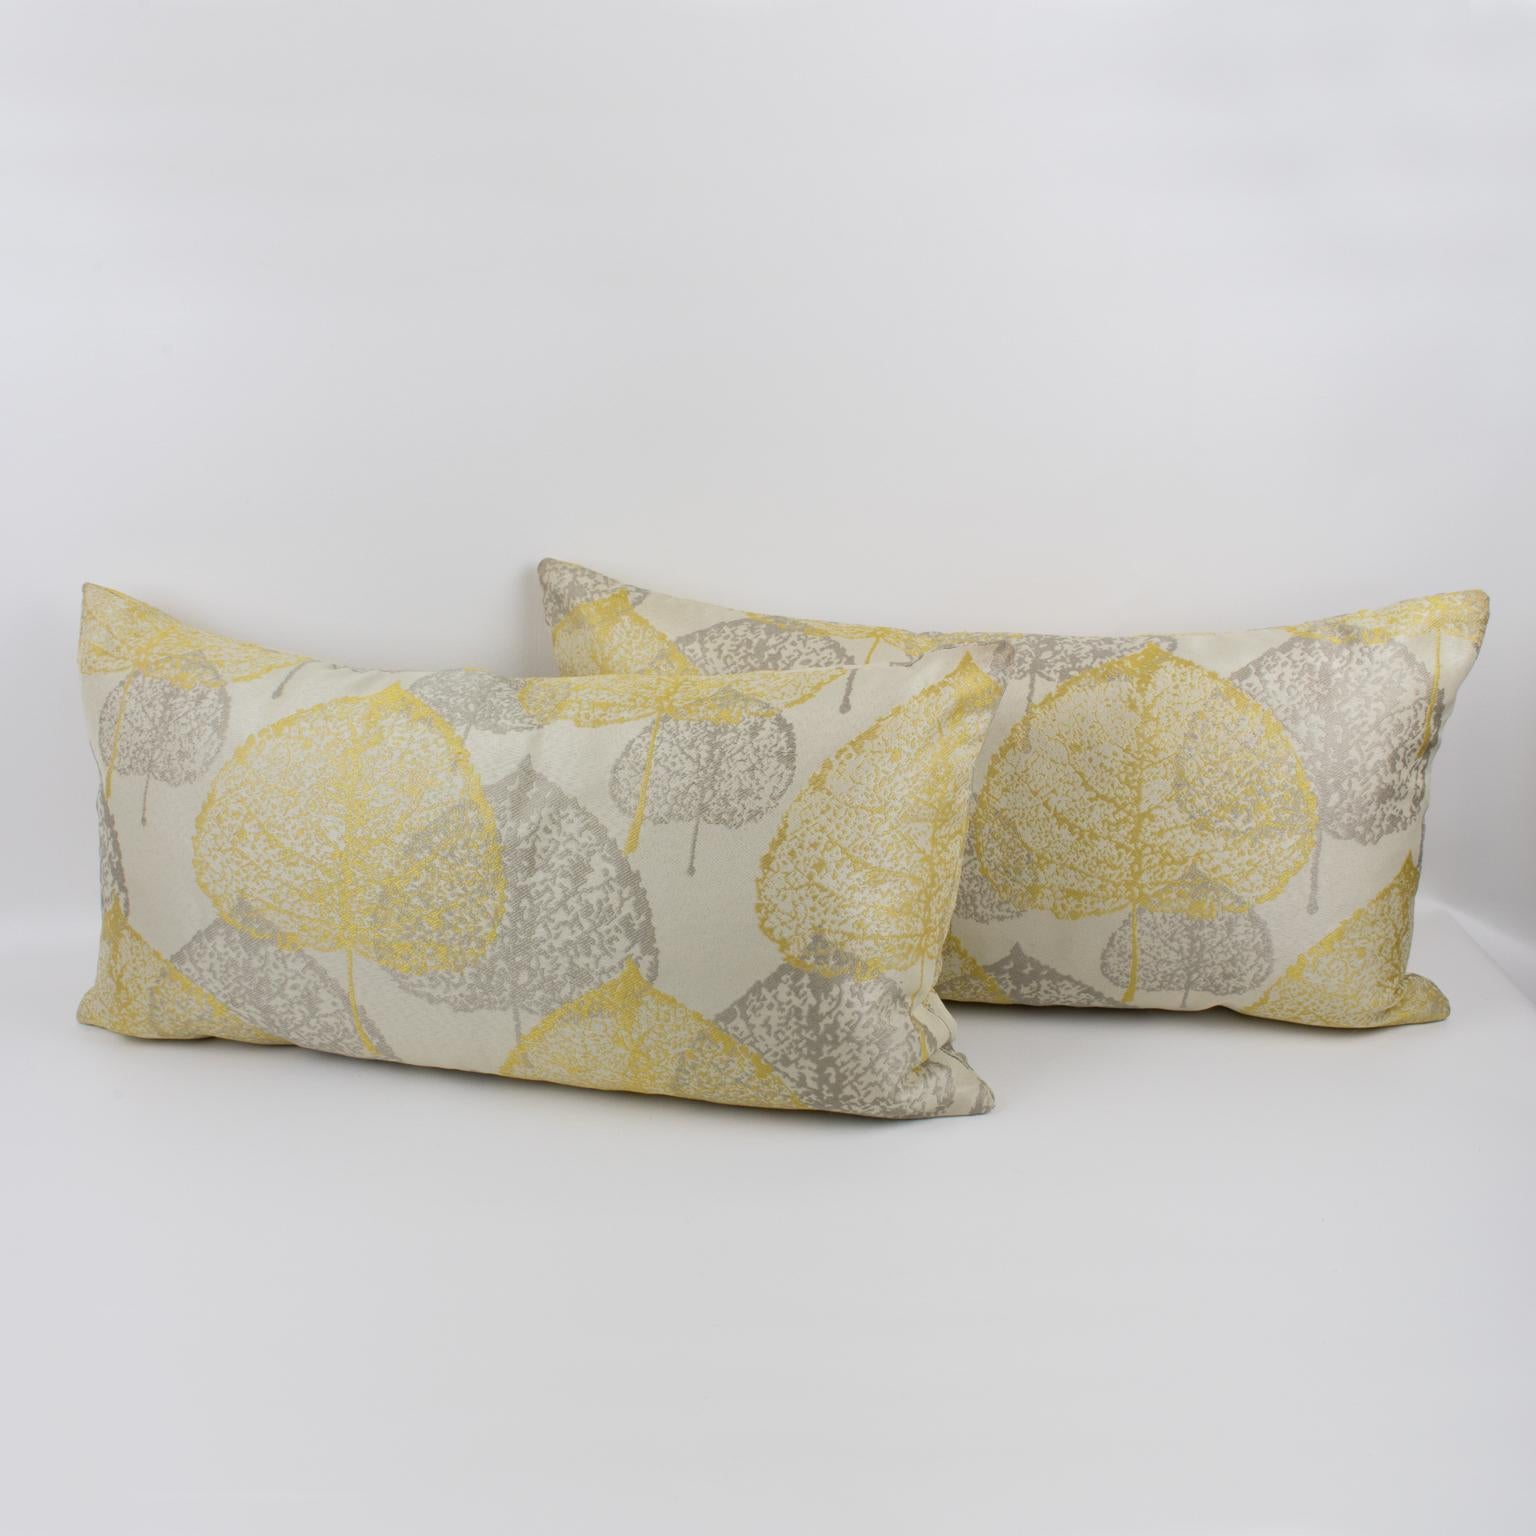 This is a lovely set of two damask throw pillows. These lumbar pillows are covered with a textured naturalist design in silver-gray and light yellow colors over a silky off-white background. A zipper encloses an inner feather pillow. Their